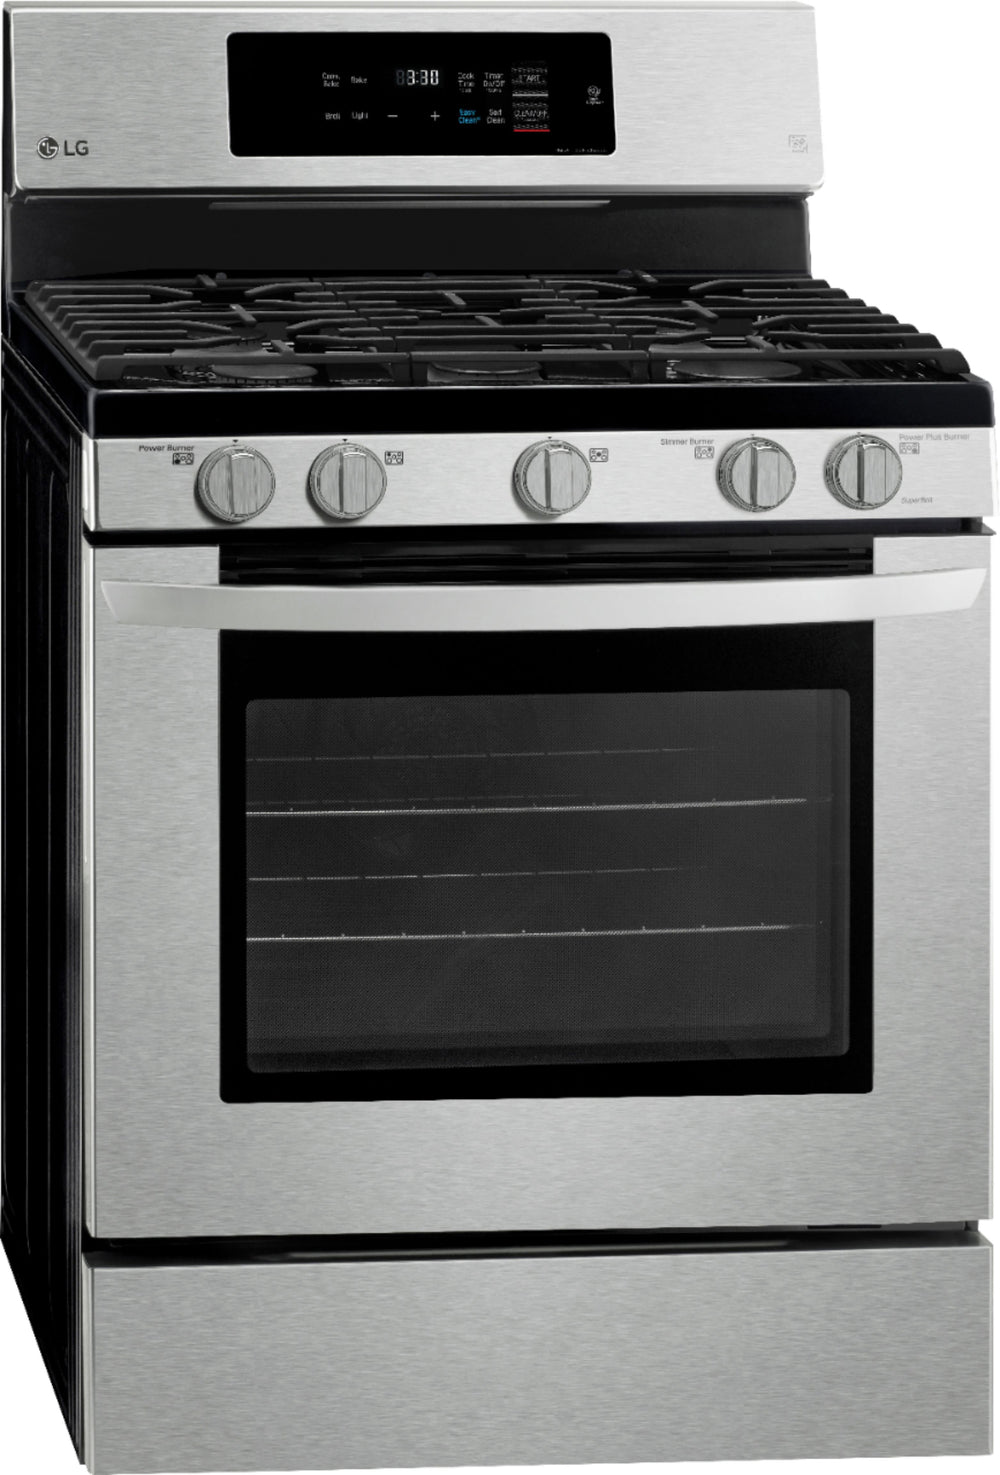 LG - 5.4 Cu. Ft. Self-Cleaning Freestanding Gas Convection Range with EasyClean - Stainless steel_1